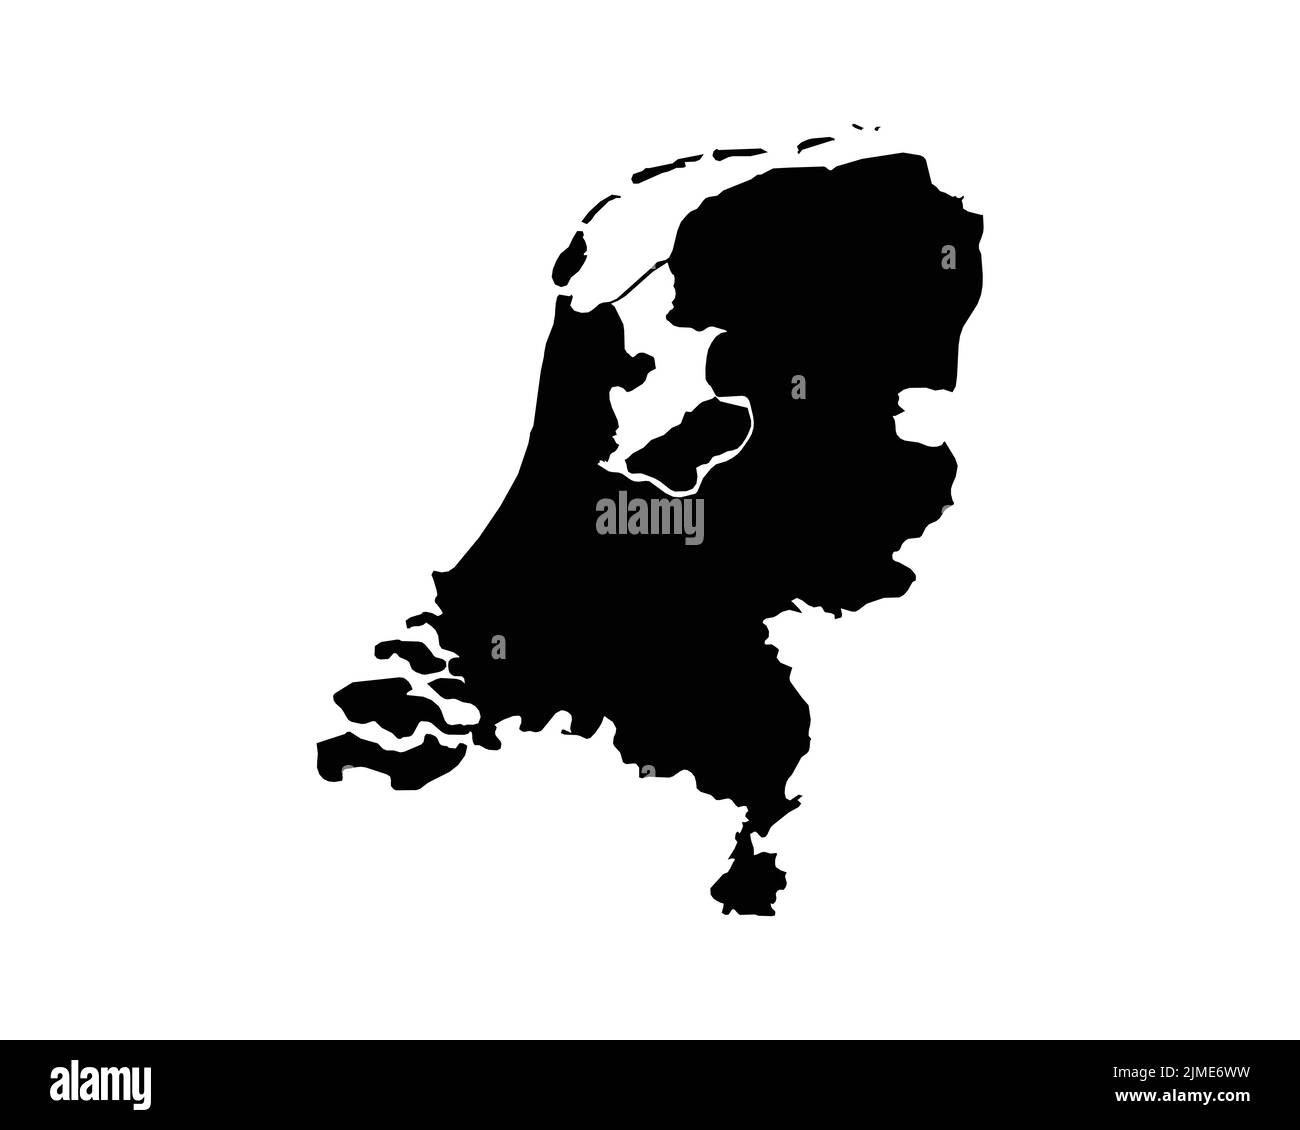 Netherlands Map. Dutch Country Map. Black and White Holland National ...